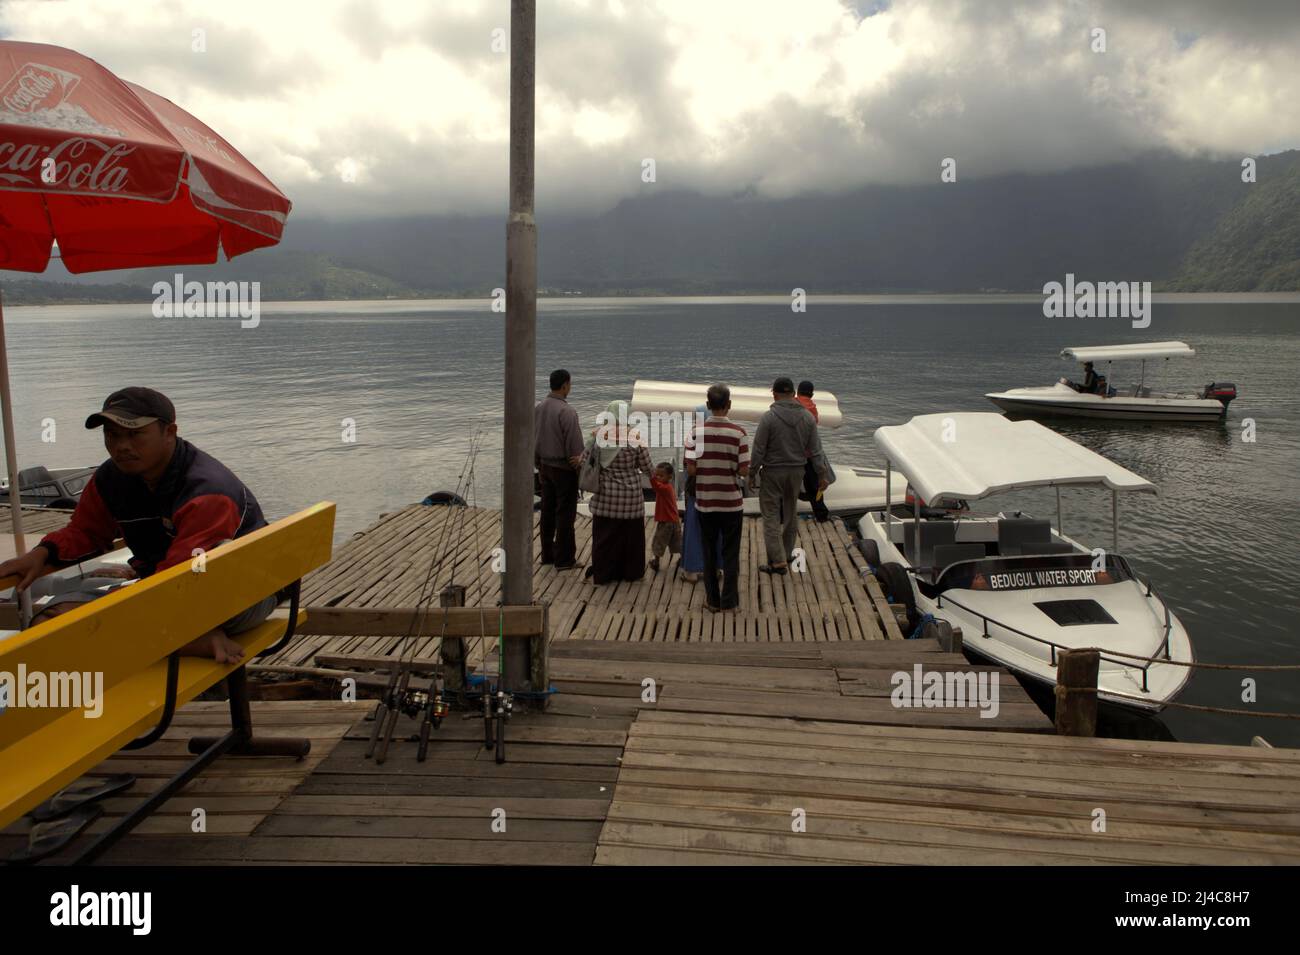 Domestic tourists at the jetty of Bedugul water sport recreational area in Bratan lake, Bedugul, Tabanan, Bali, Indonesia. Bratan lake is one of the four lakes—along with Buyan, Tamblingan and Batur—that are supporting the lives of Balinese people. Stock Photo